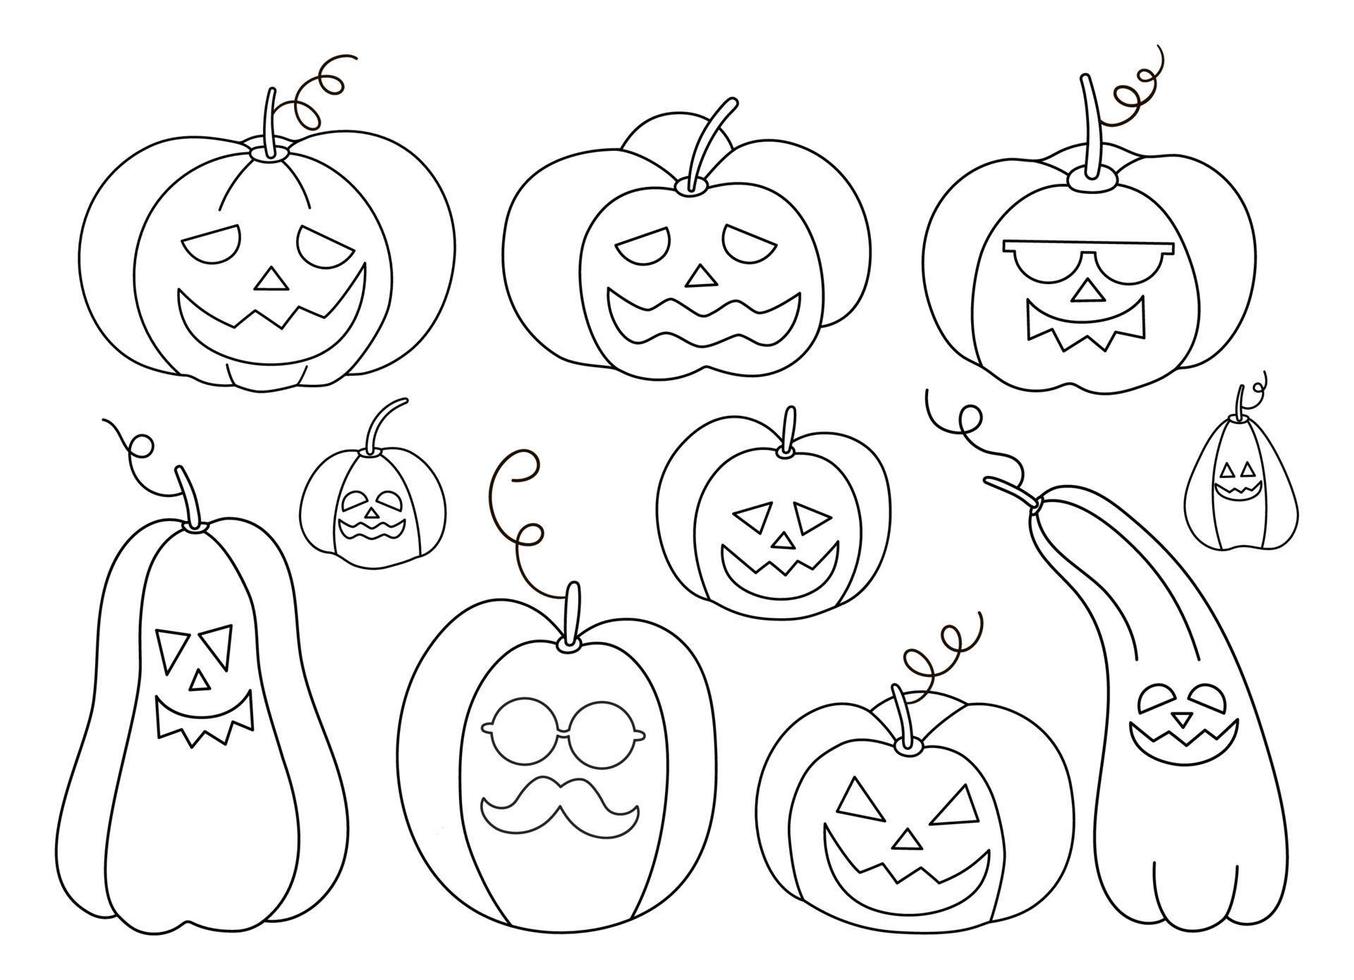 Vector black and white jack-o-lanterns set. Outline Halloween party illustration or coloring page with funny pumpkin lanterns. Scary design for Autumn Samhain party. All saints day elements.